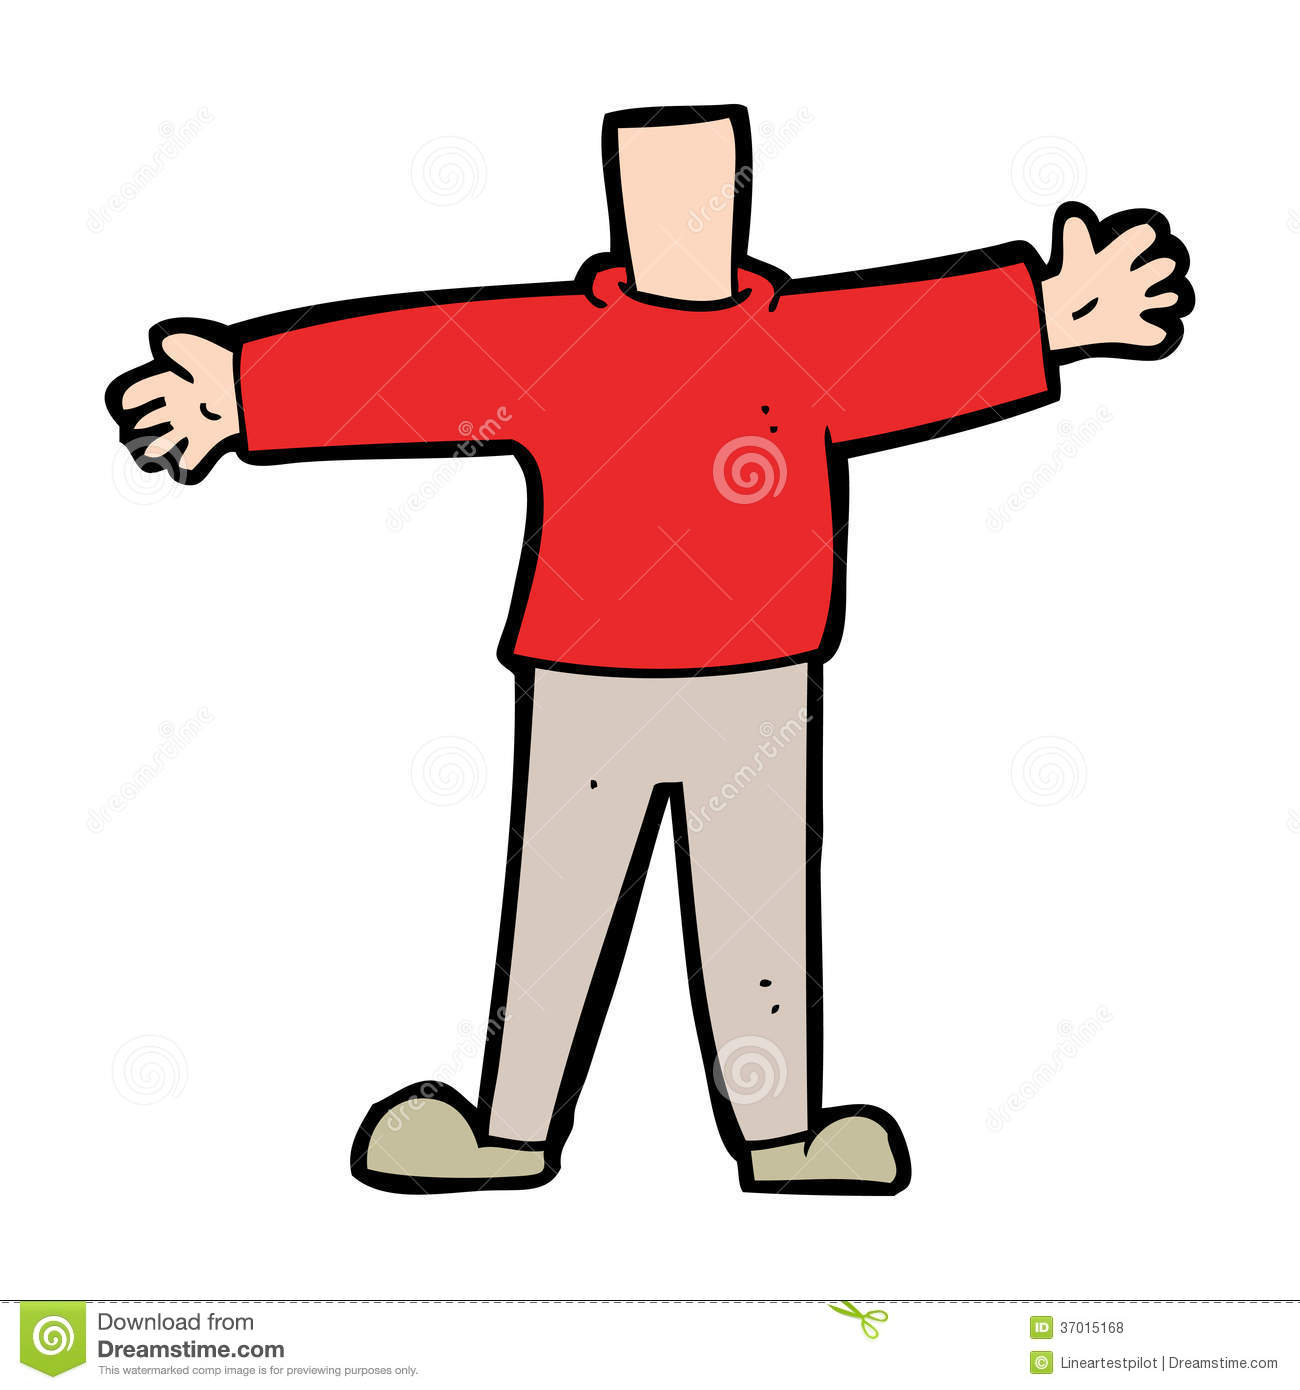 Showing post & media for Cartoon male head with body.